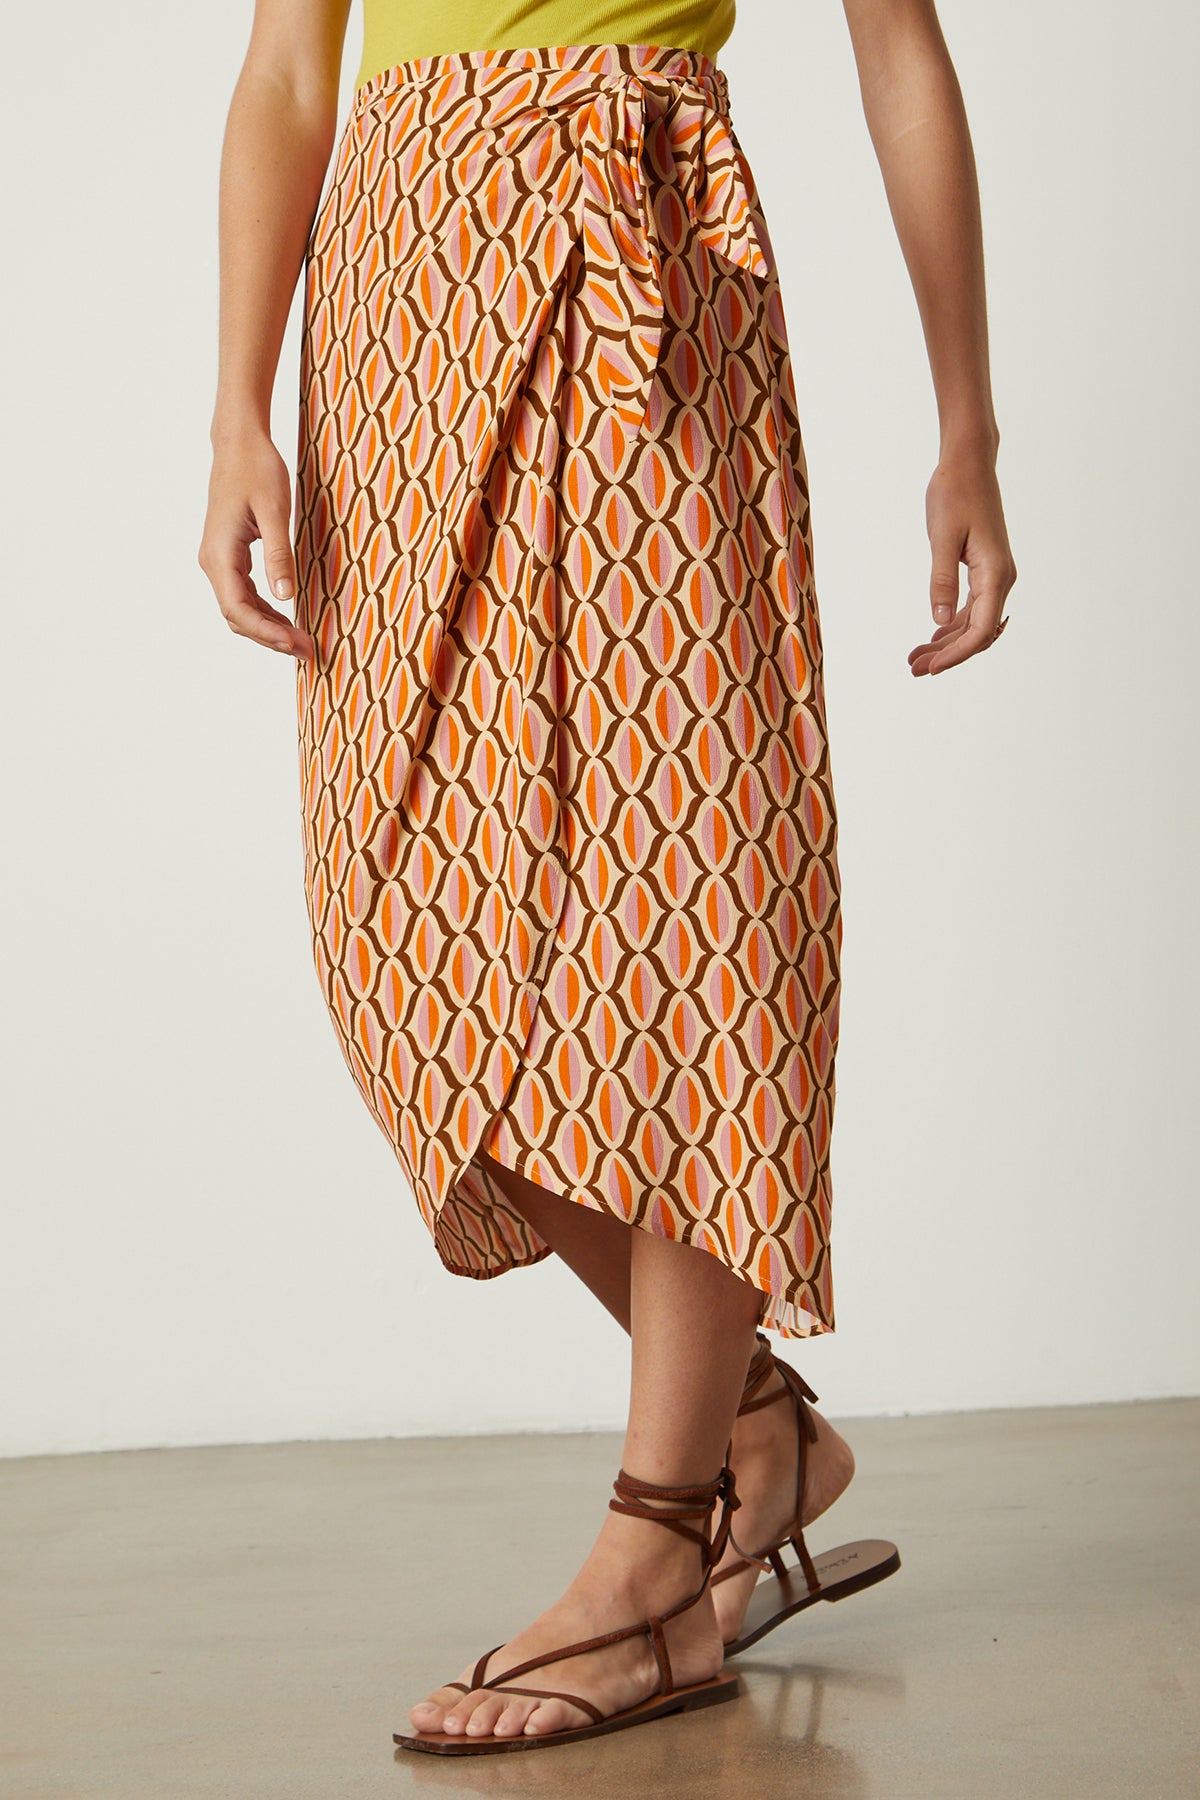 Alisha skirt in orange geometric pattern with sandals front & side-26078931910849